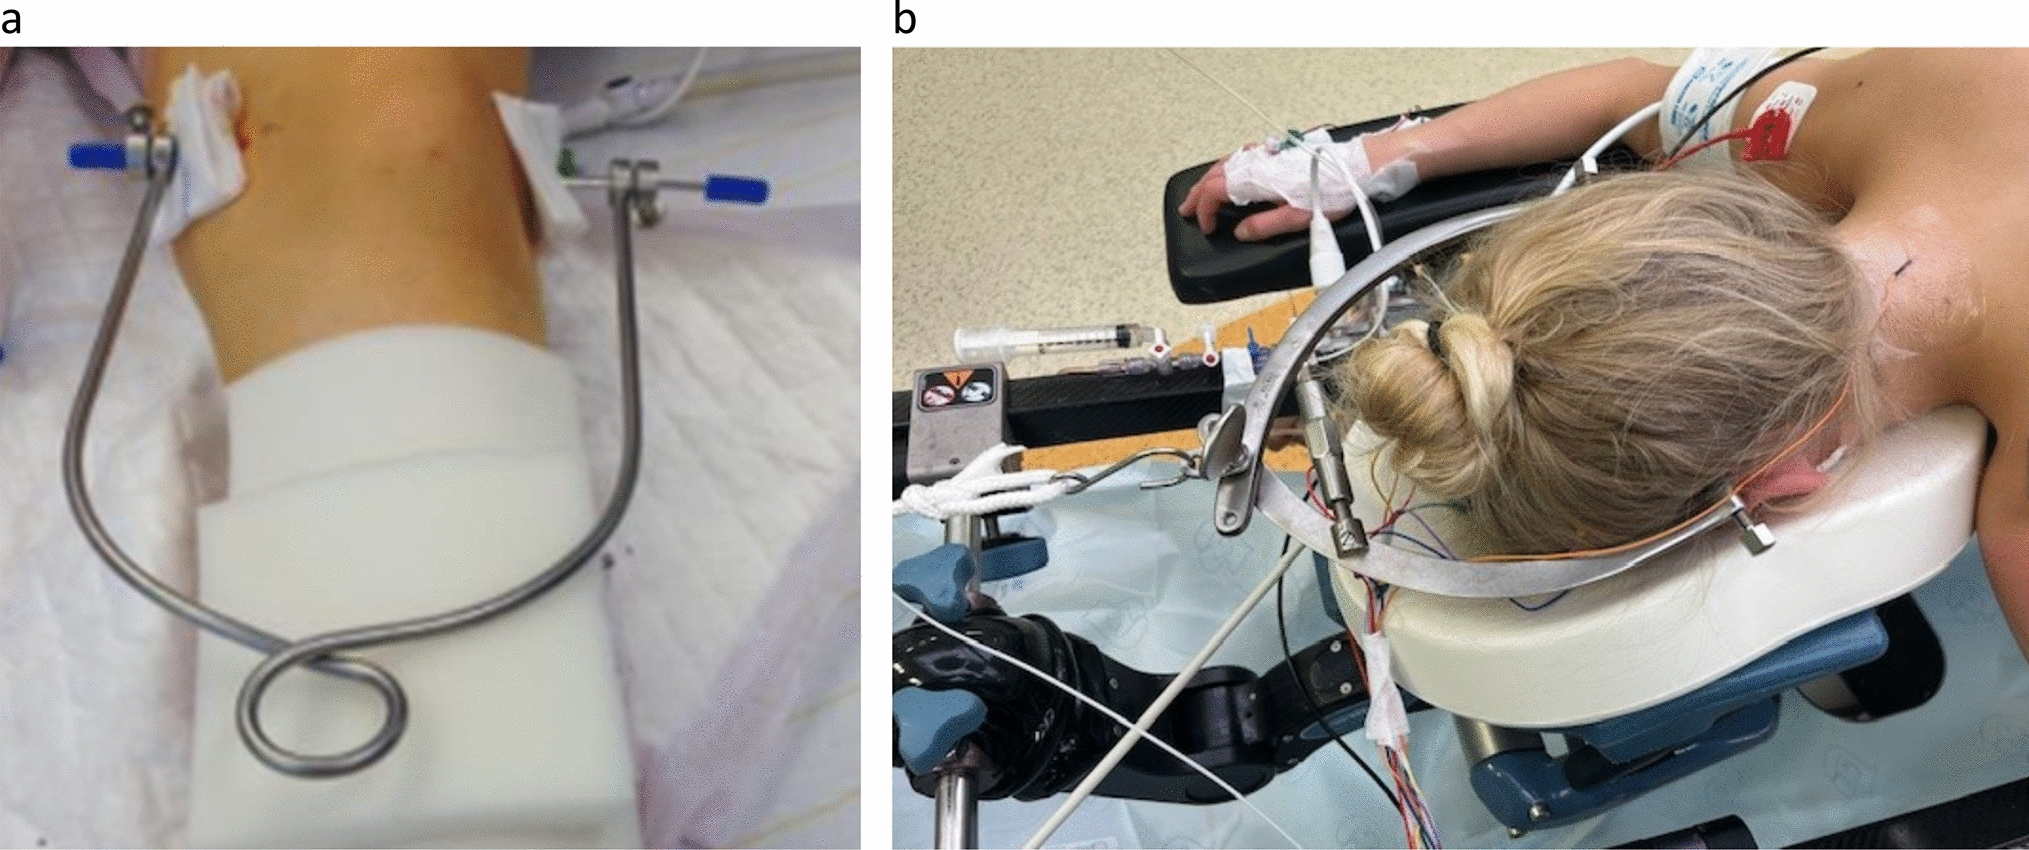 Risk factors for neurophysiological events related to intraoperative halo-femoral traction in spinal deformity surgery